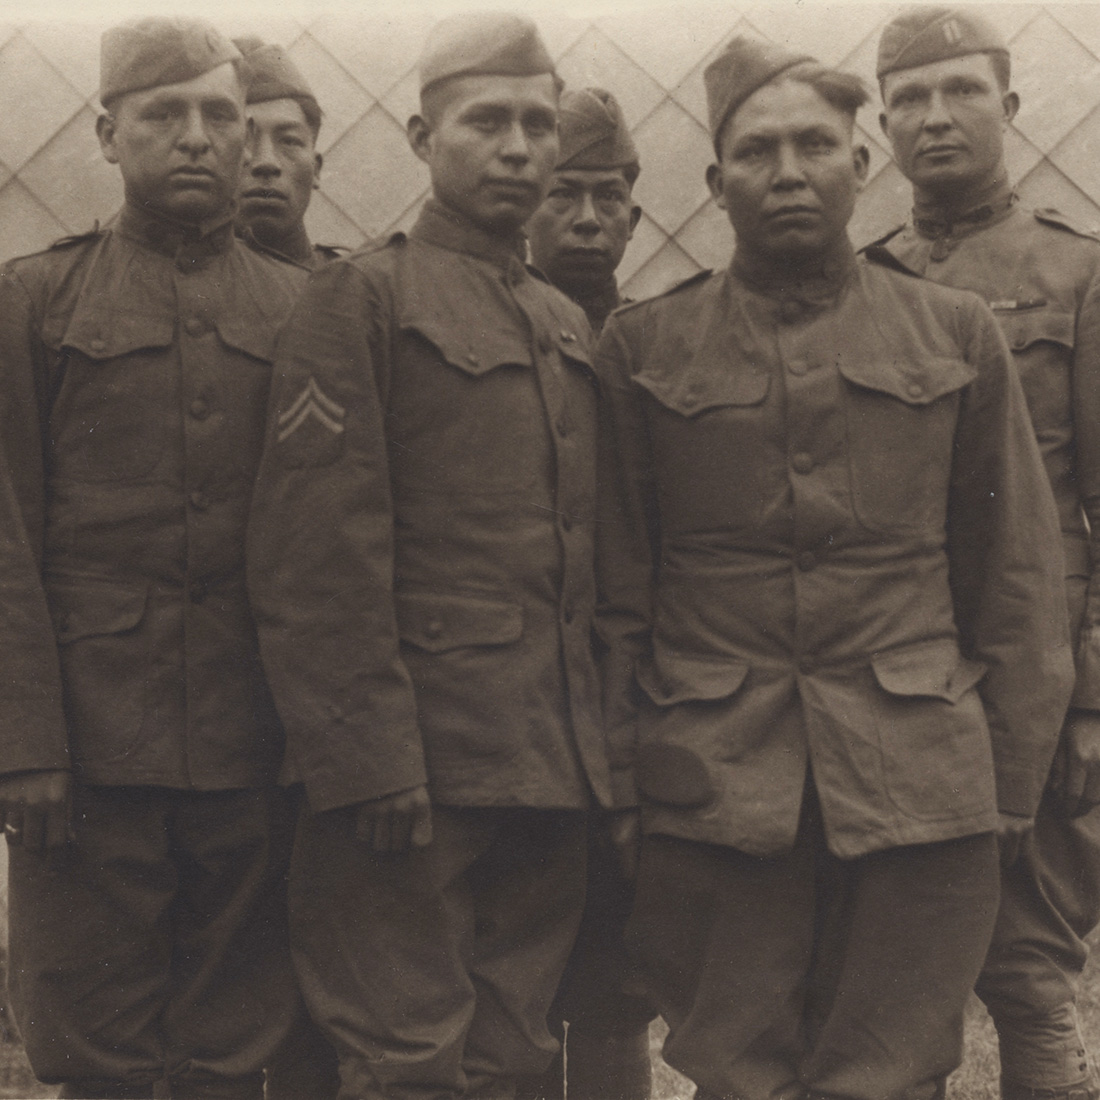 6 Choctaw Indians in WWII military uniforms